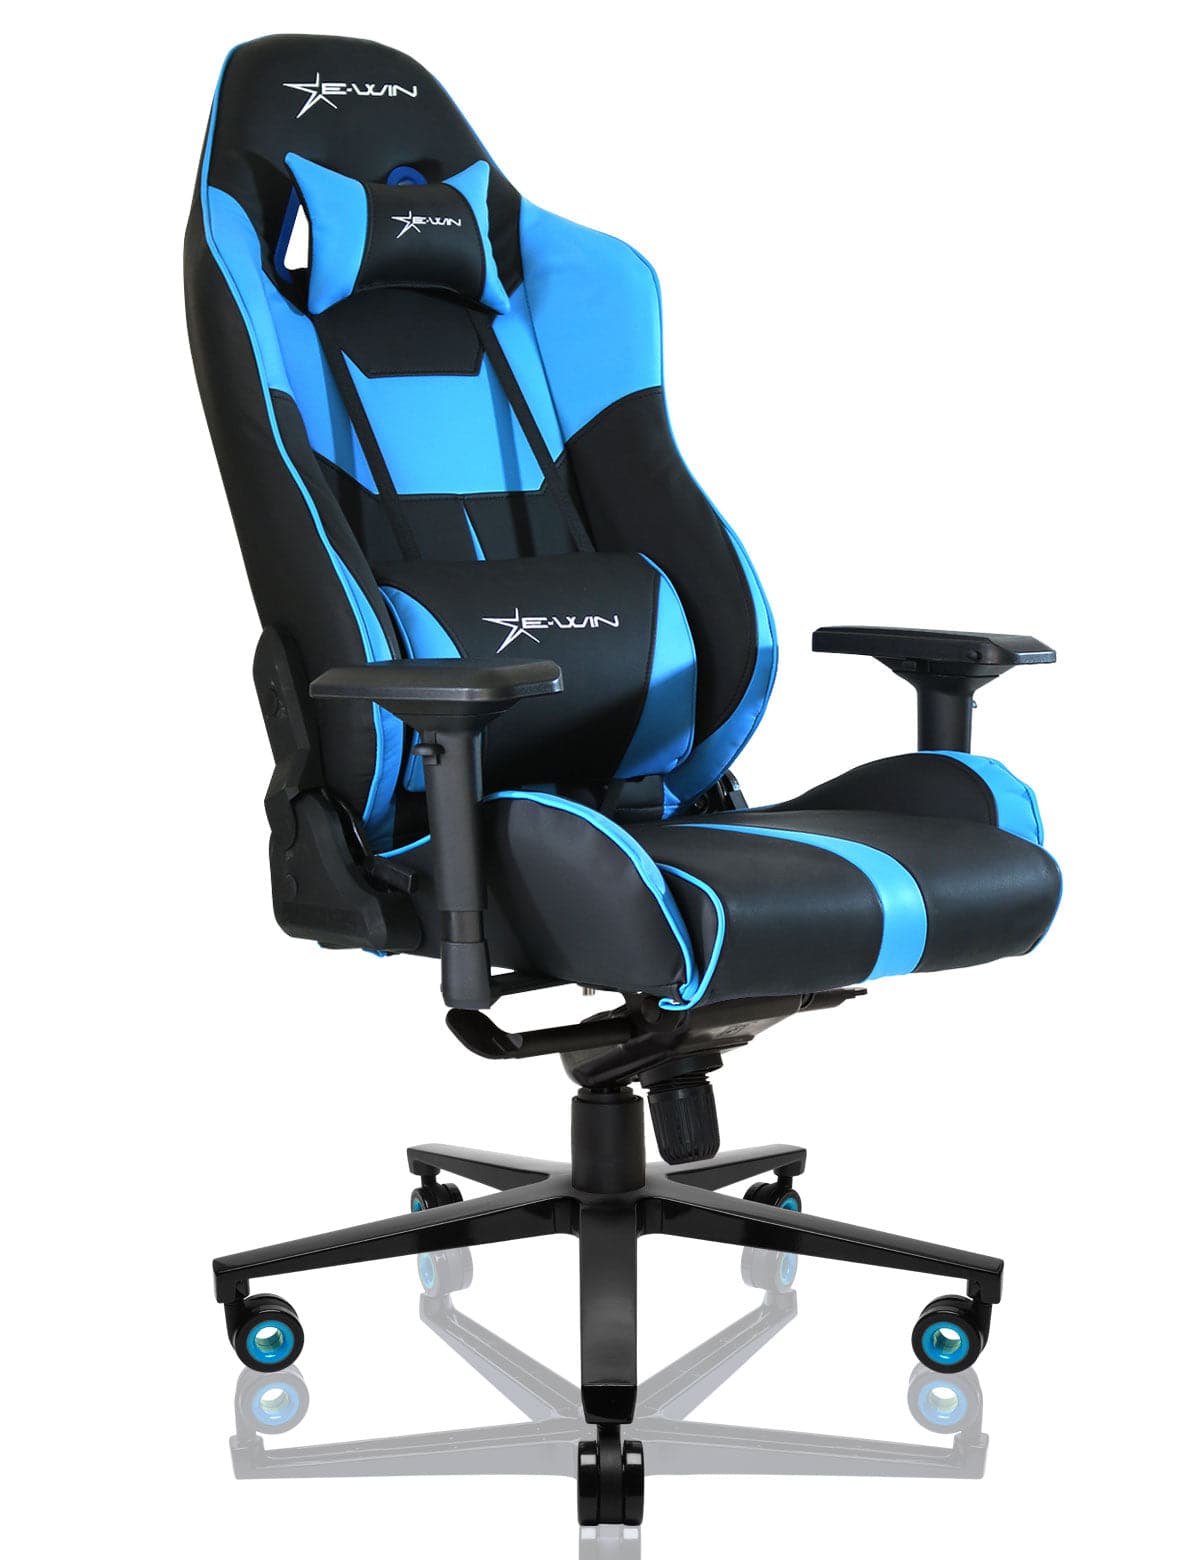 E-WIN Champion Series Ergonomic Computer Gaming Office Chair with Pill